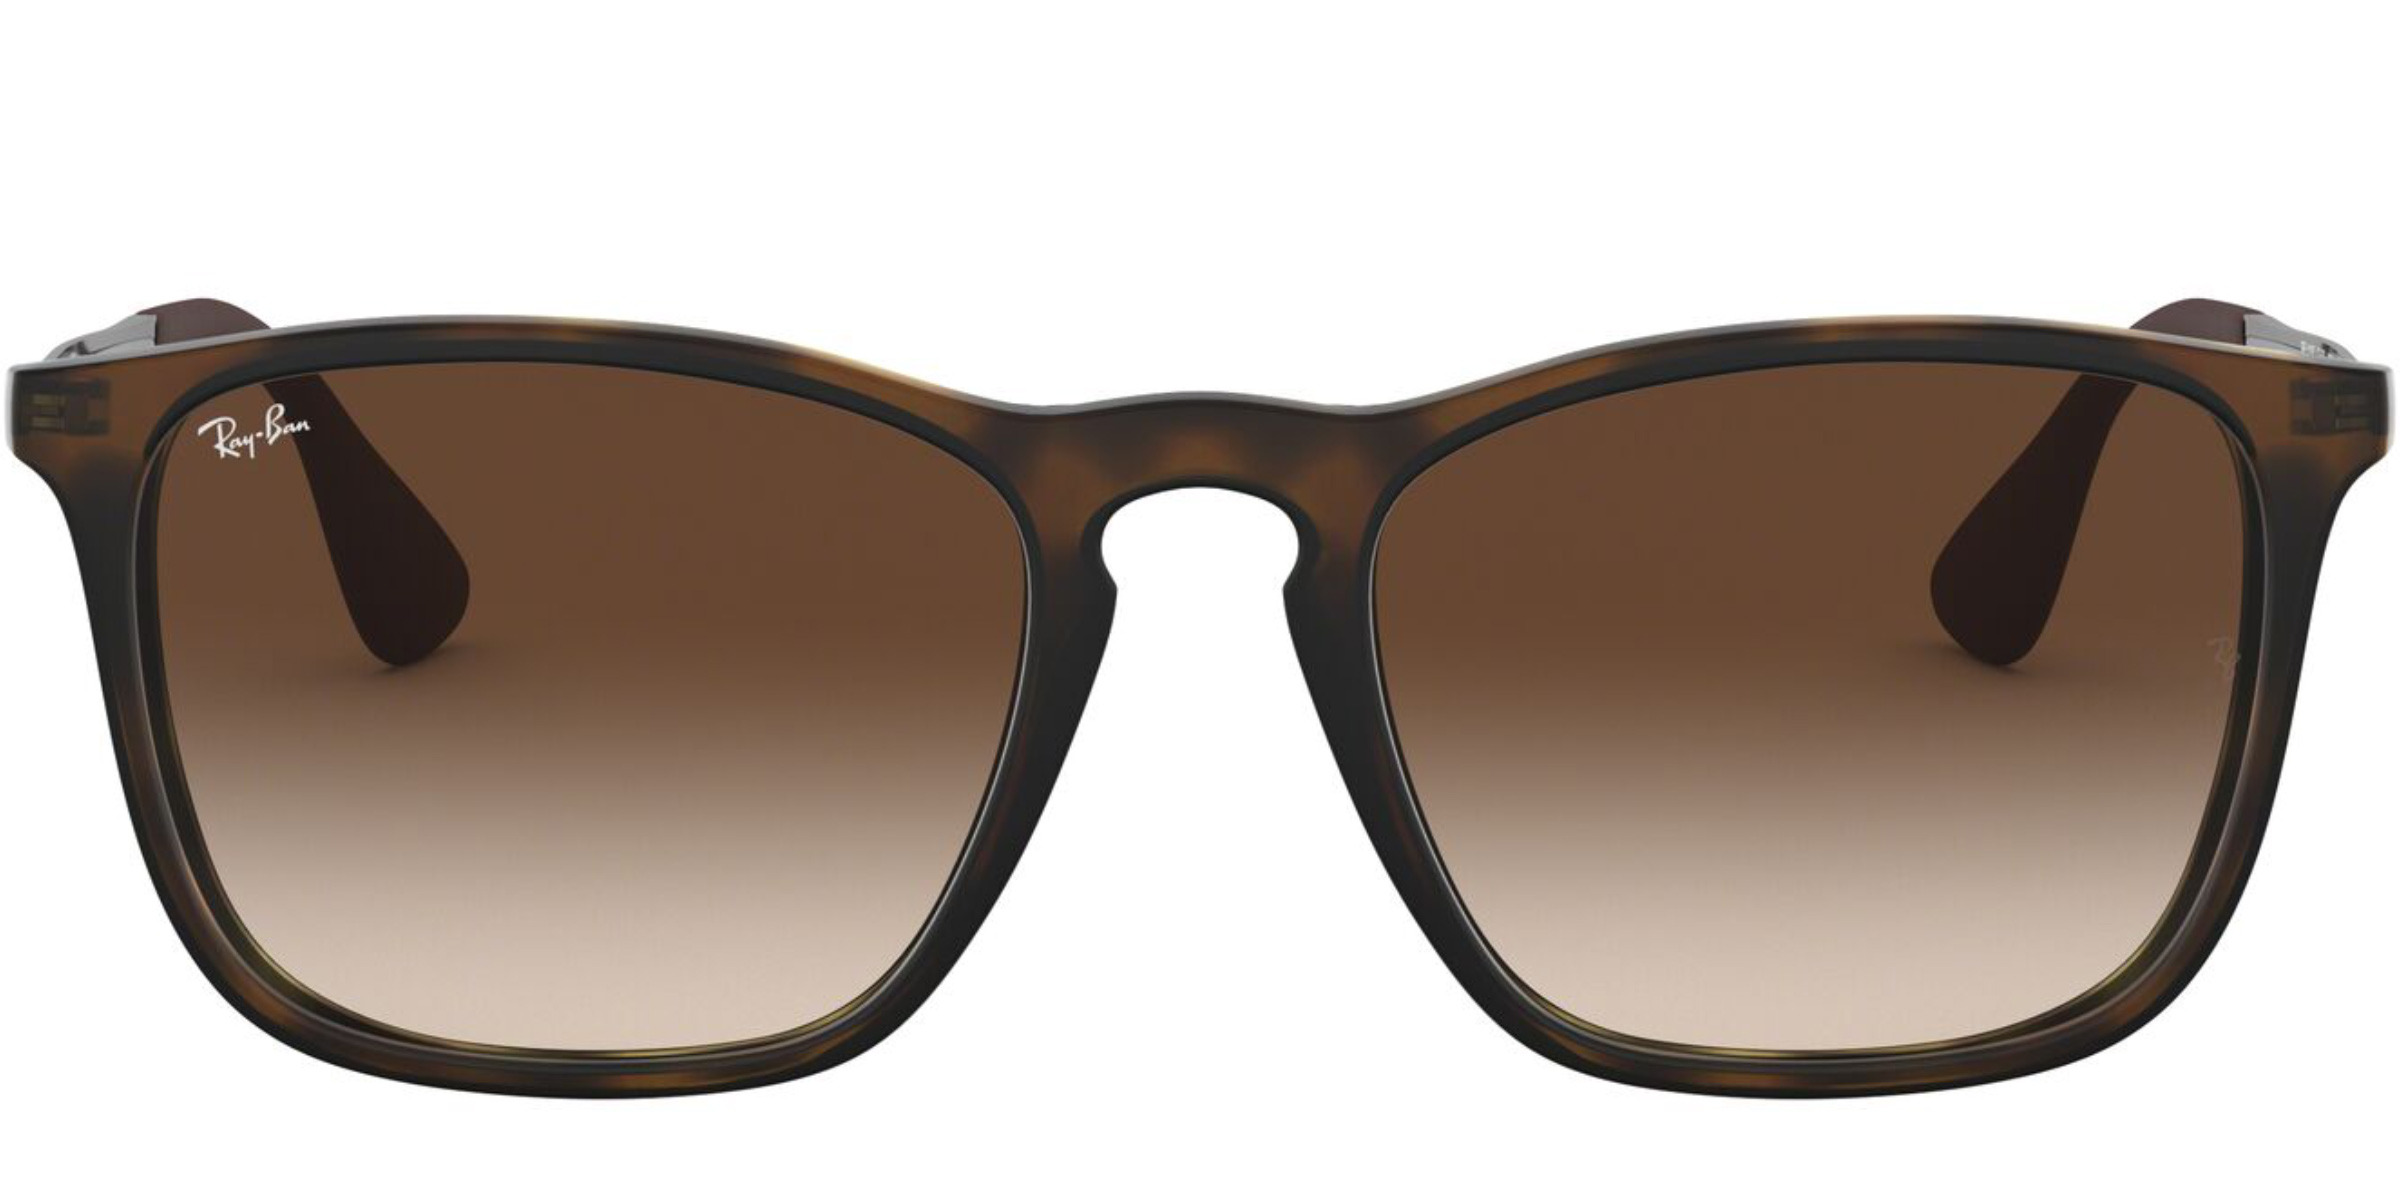 Ray ban 55. Ray ban 4447n. Ray-ban rb4235 601s. Ray-ban rb4291 601/71. Ray ban rb4387 601/71.